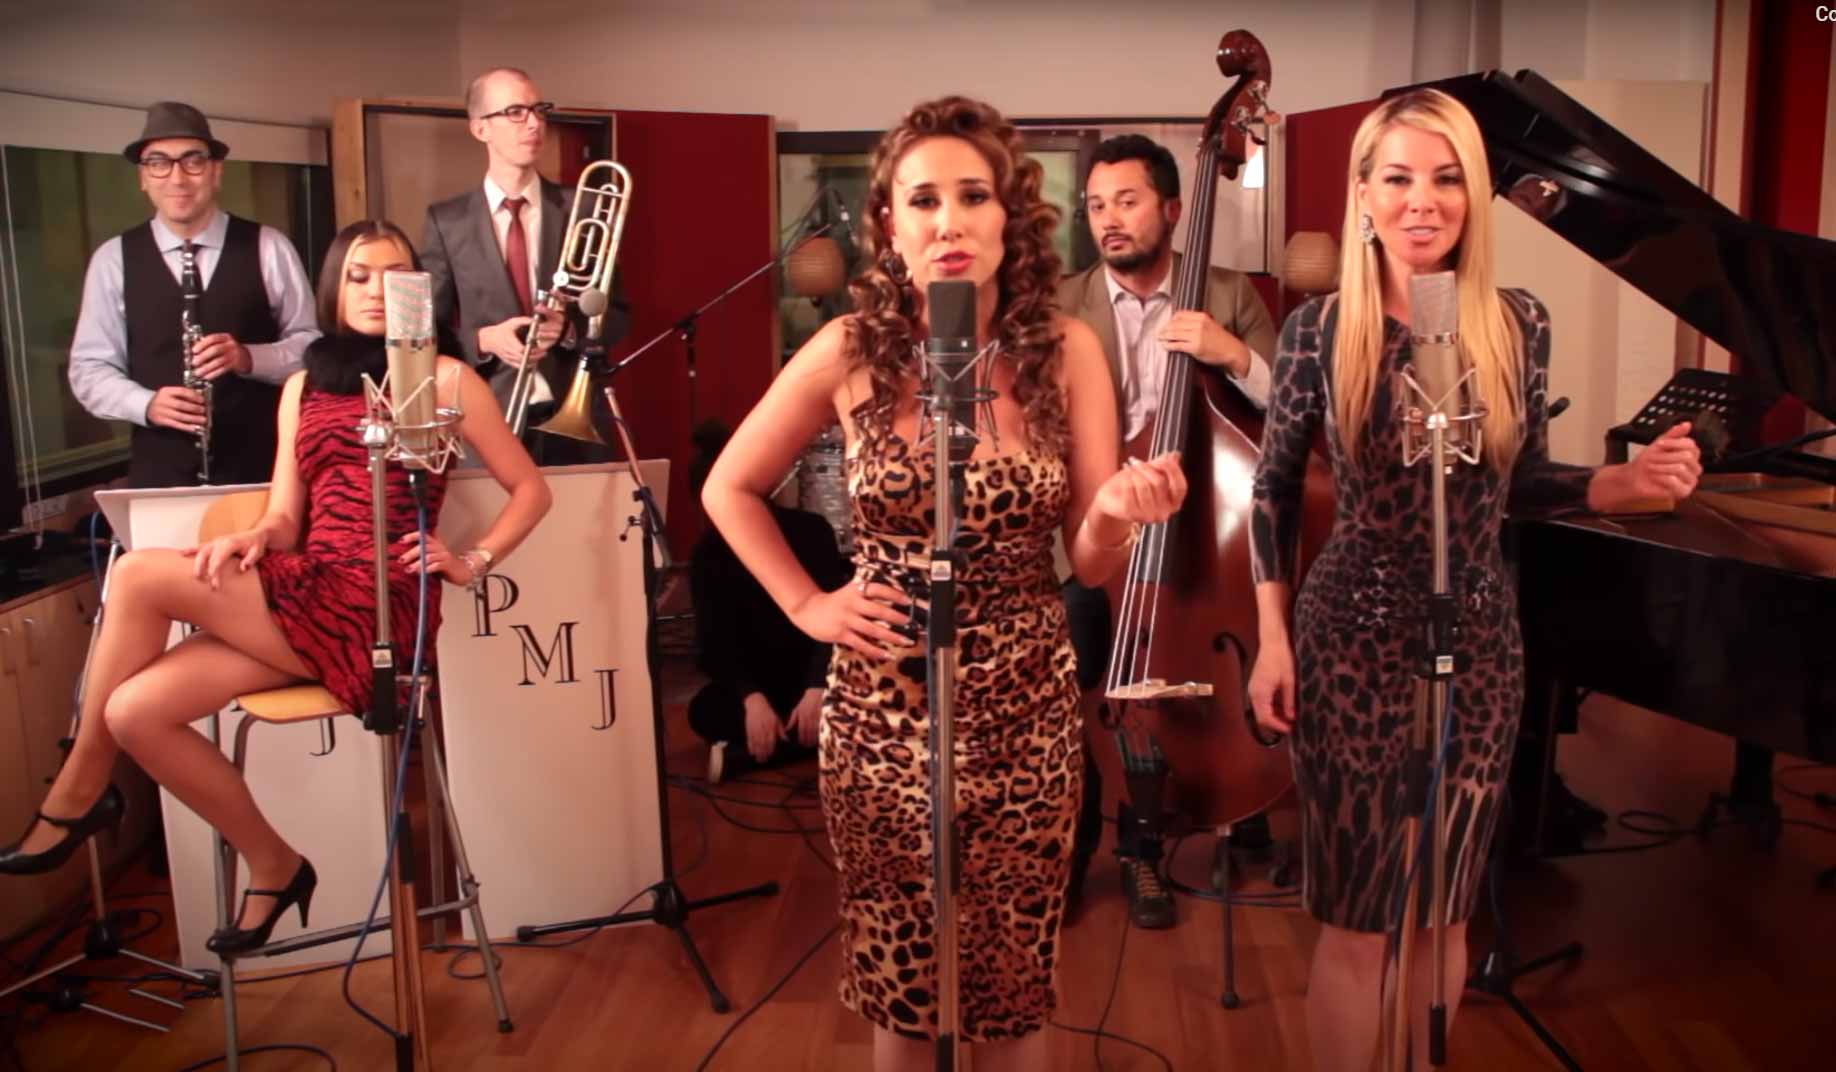 Performed by Postmodern Jukebox,  Meghan Trainor’s 'All About That Bass' in the style of PMJ ft. Kate Davis.